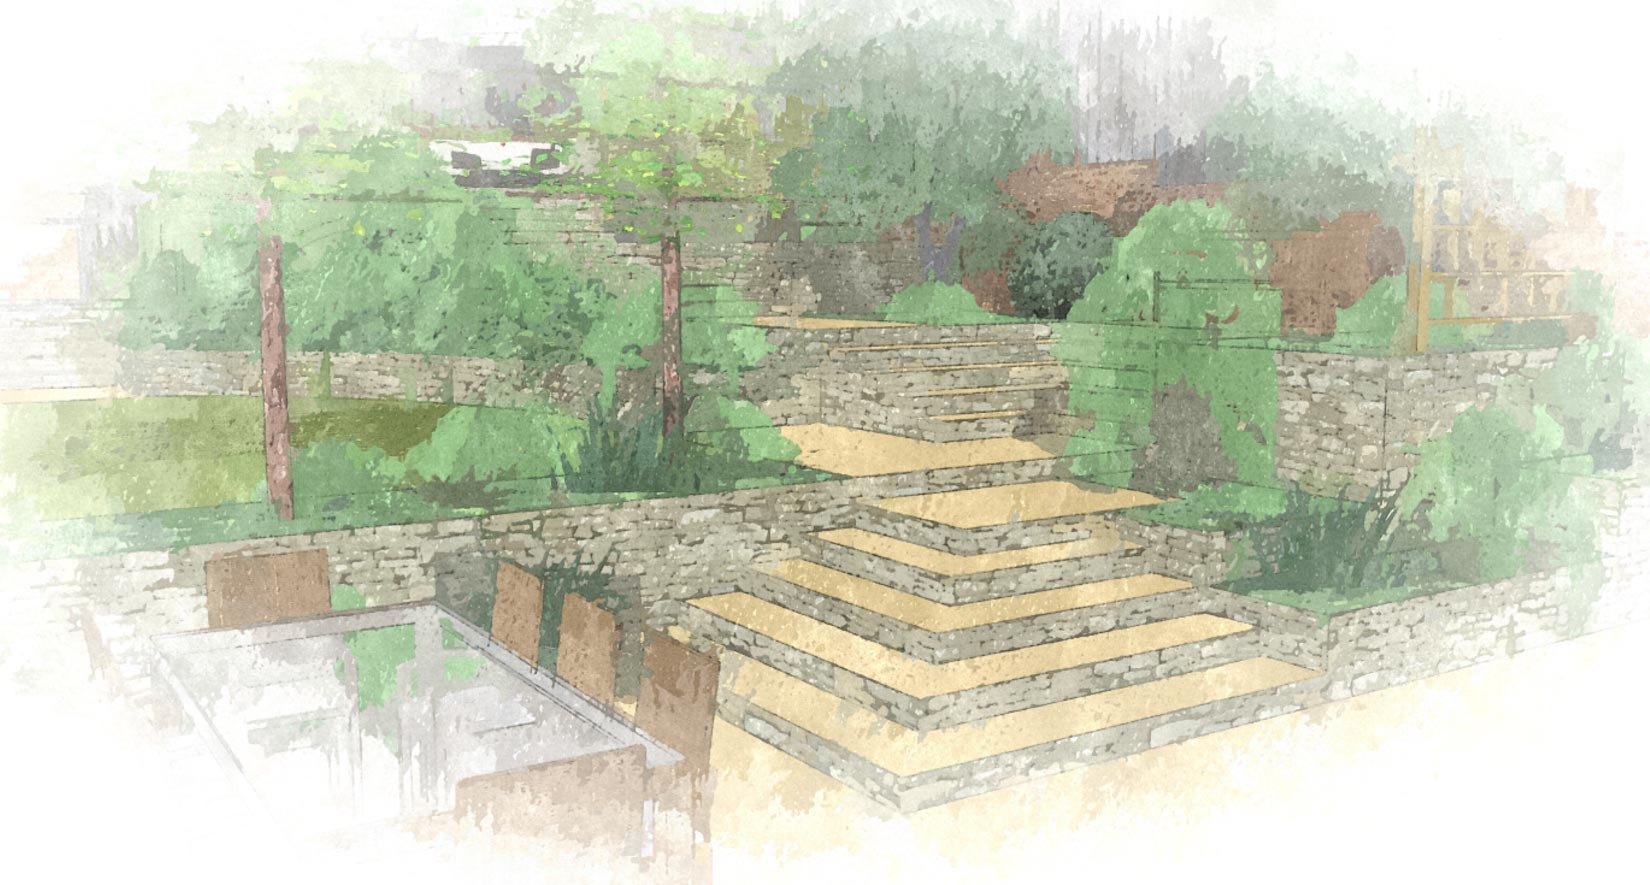 slate grey garden design plans are hand drawn and coloured with great care